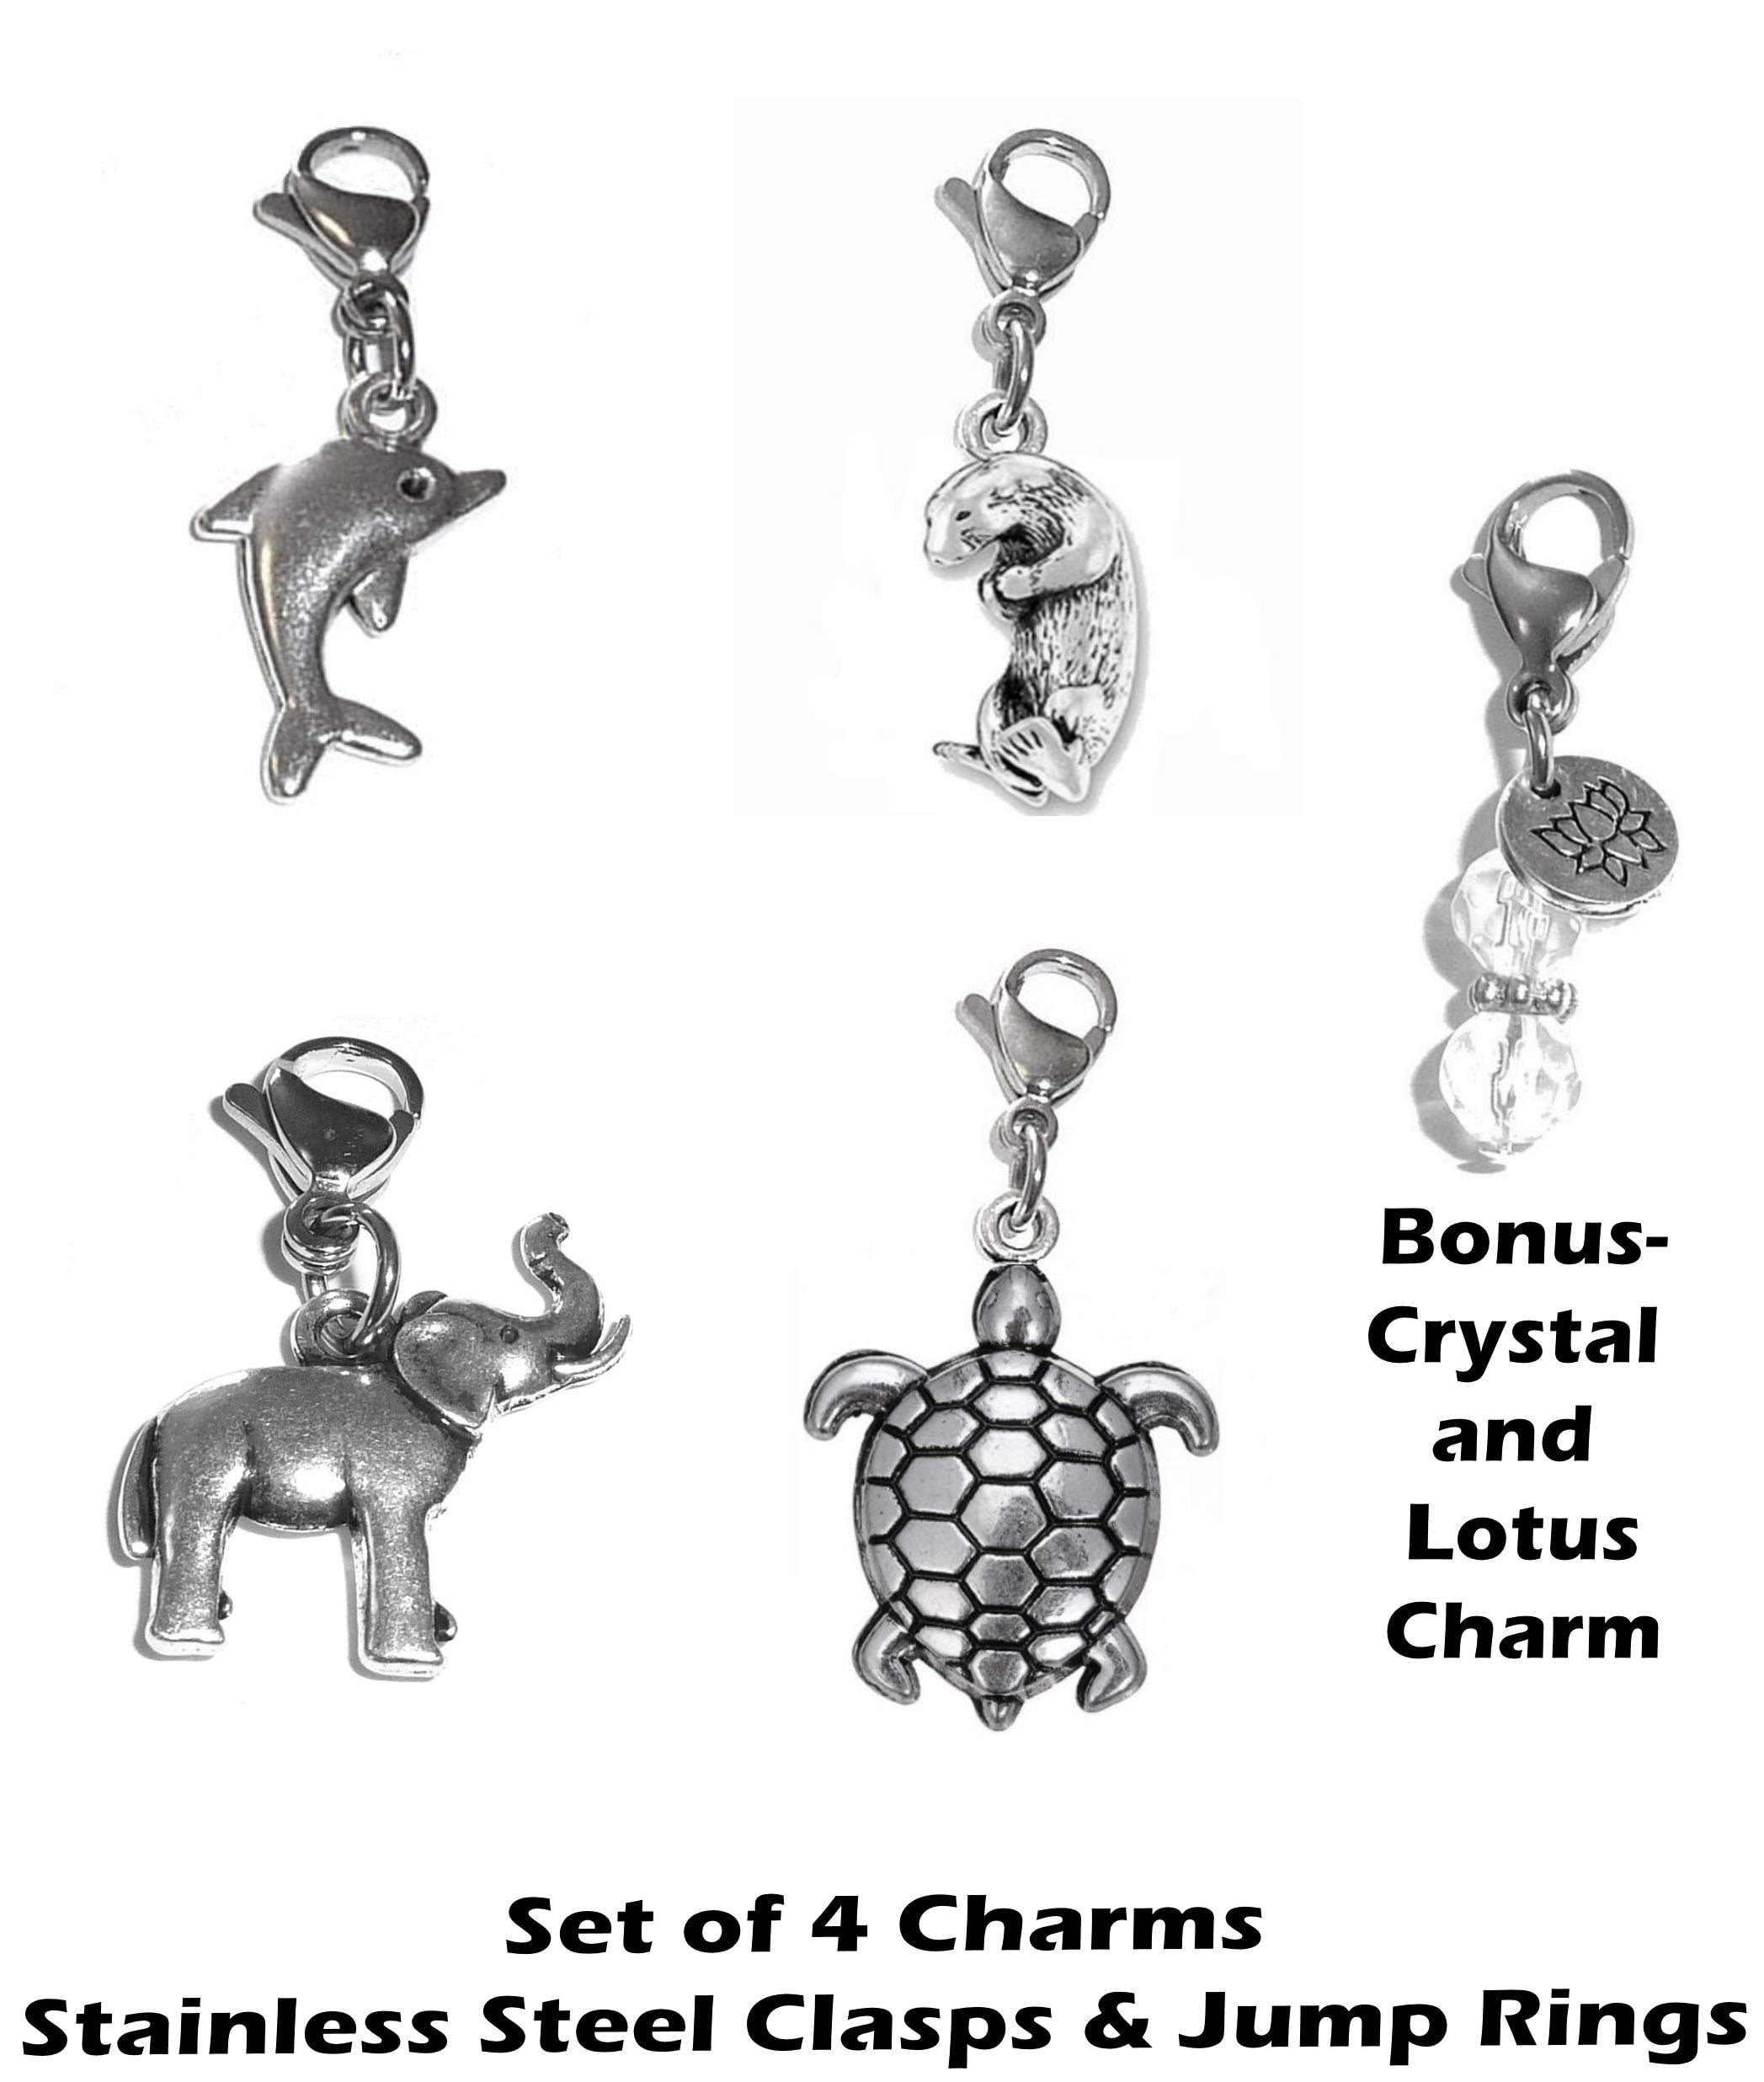 Charms Clip On - Perfect For Bracelet Or Necklace, Zipper Pull Charm, Bag  Or Purse Charm Easy To Use DIY Charms - Cousins Make the Best Friends Clip  On Charm 